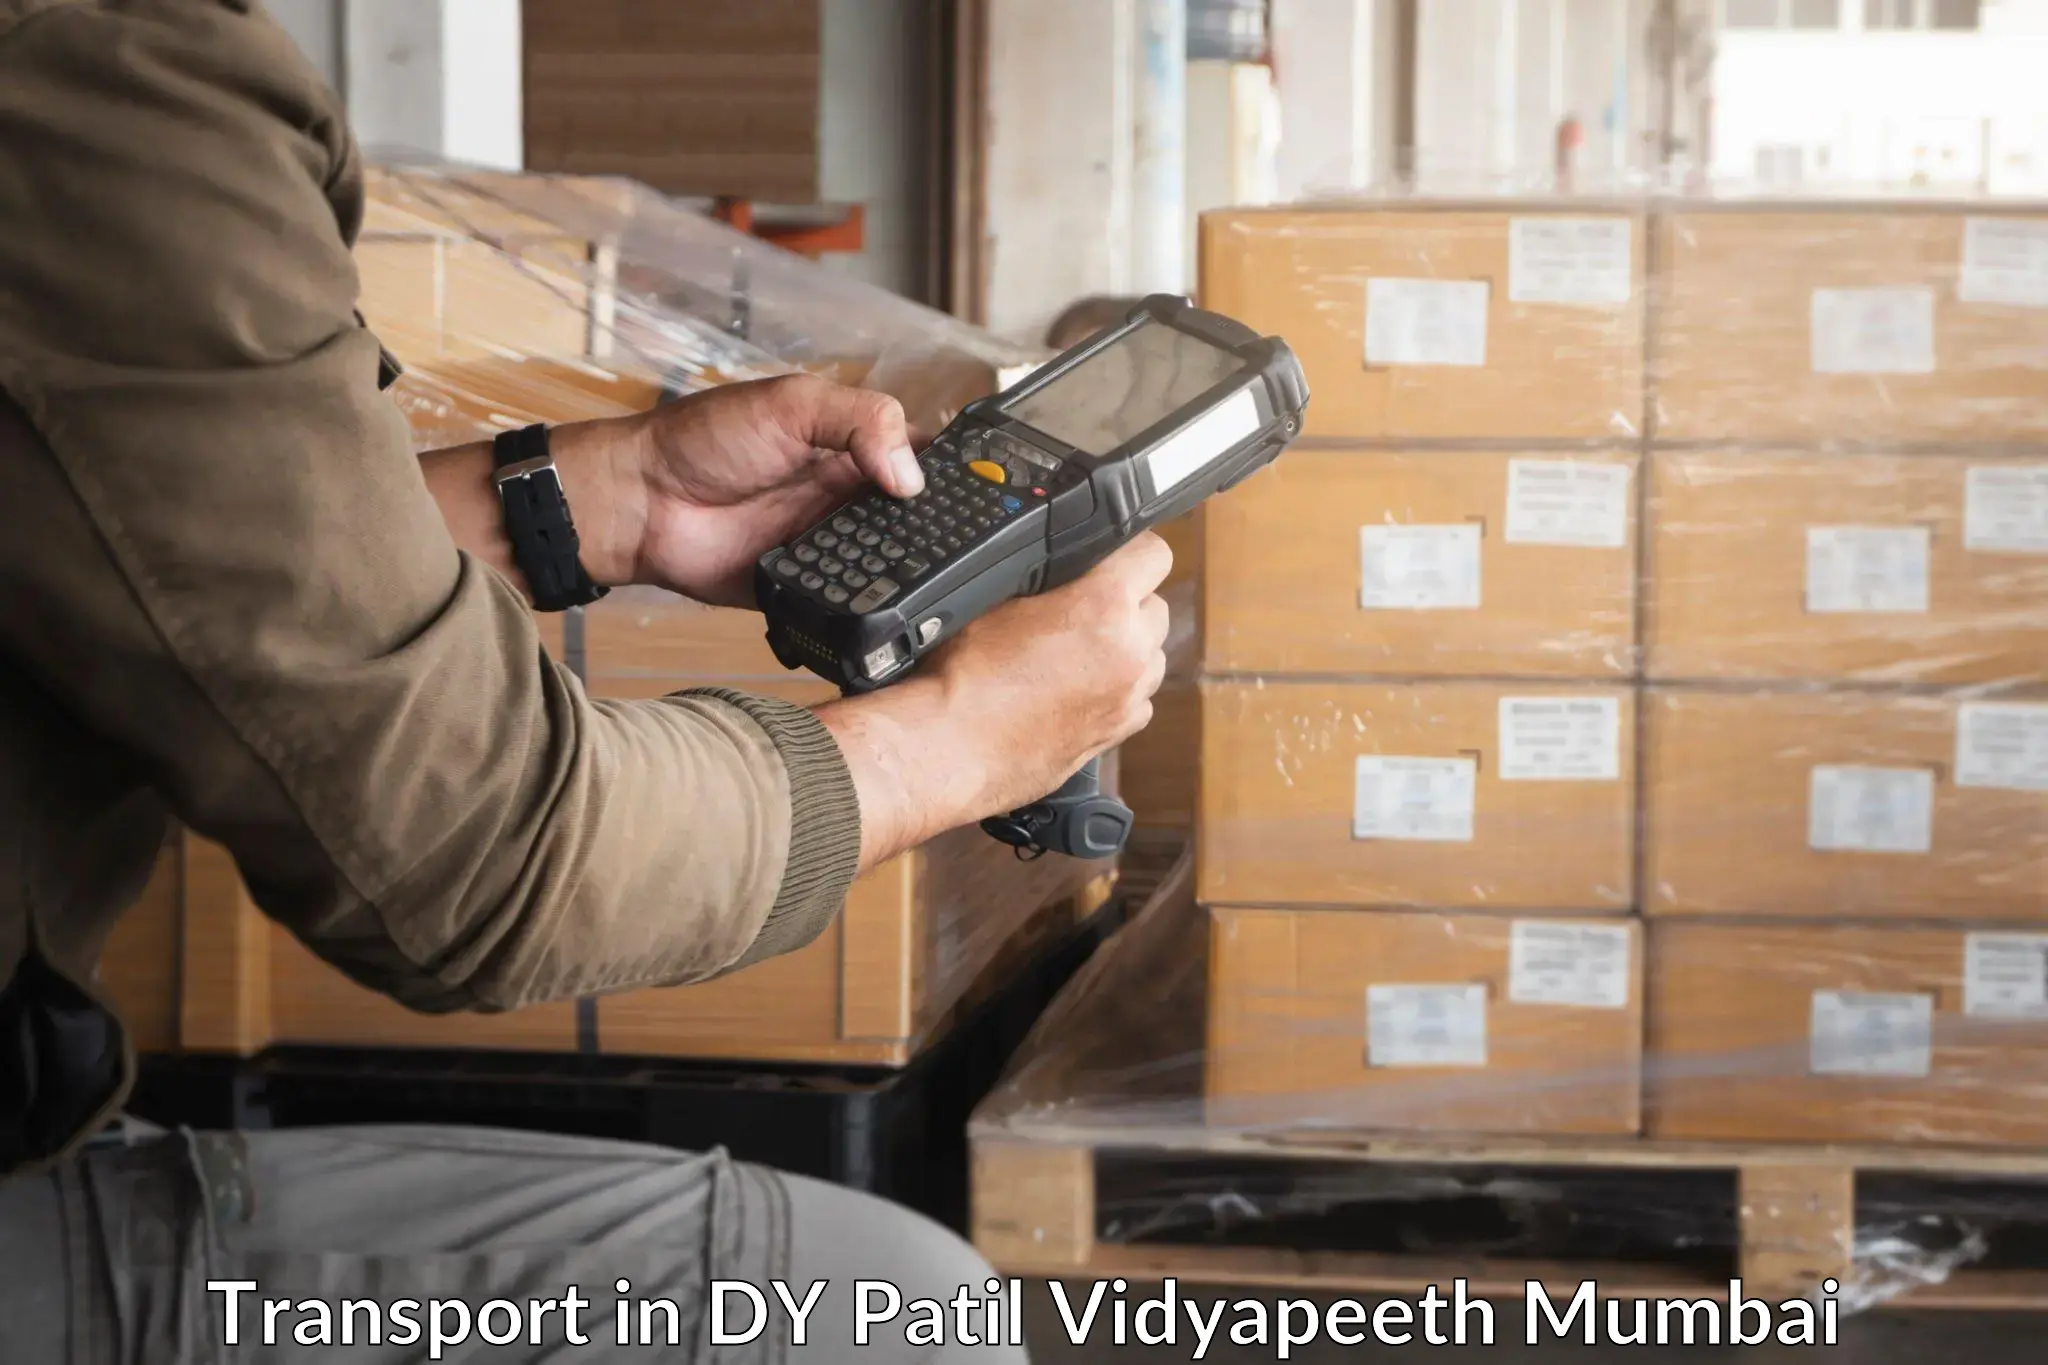 Air freight transport services in DY Patil Vidyapeeth Mumbai